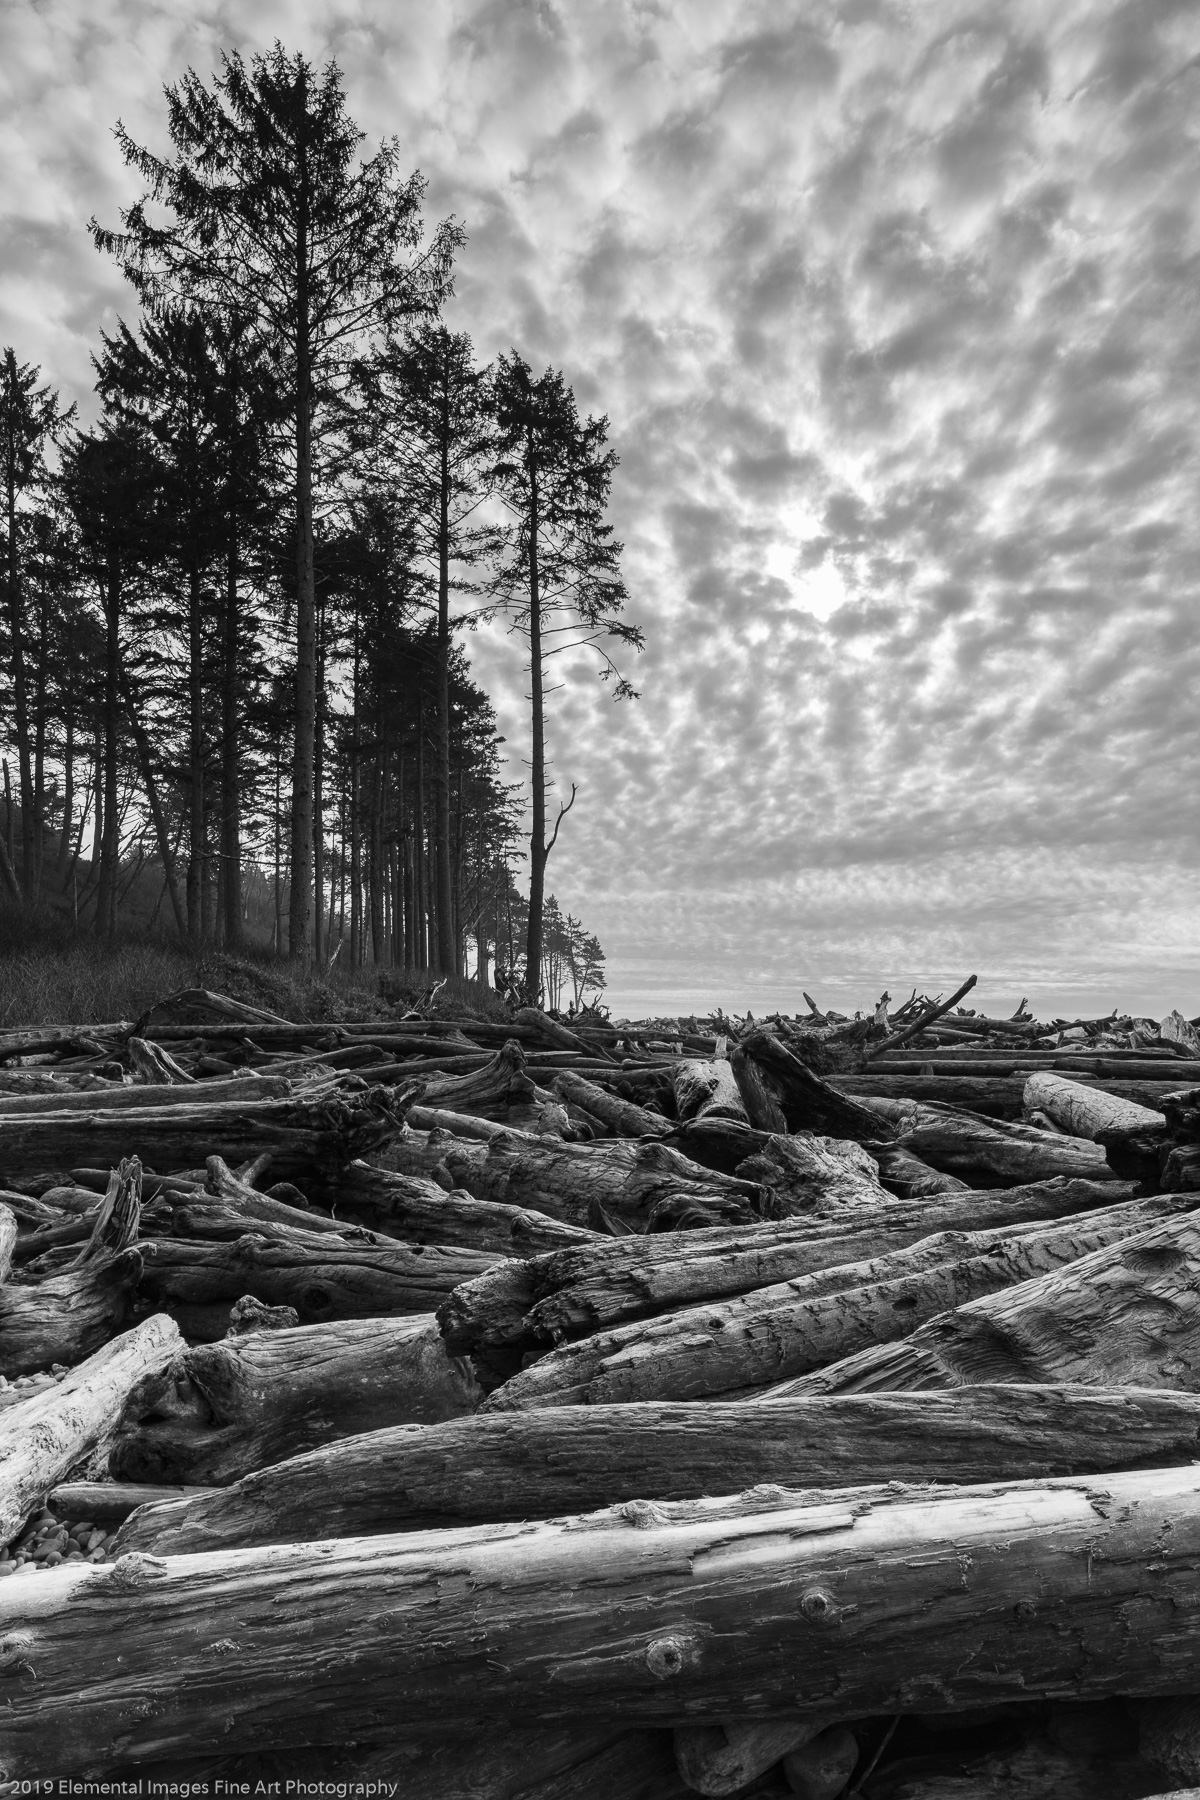 Sky and Timber | Olympic National Park | WA | USA - © 2019 Elemental Images Fine Art Photography - All Rights Reserved Worldwide